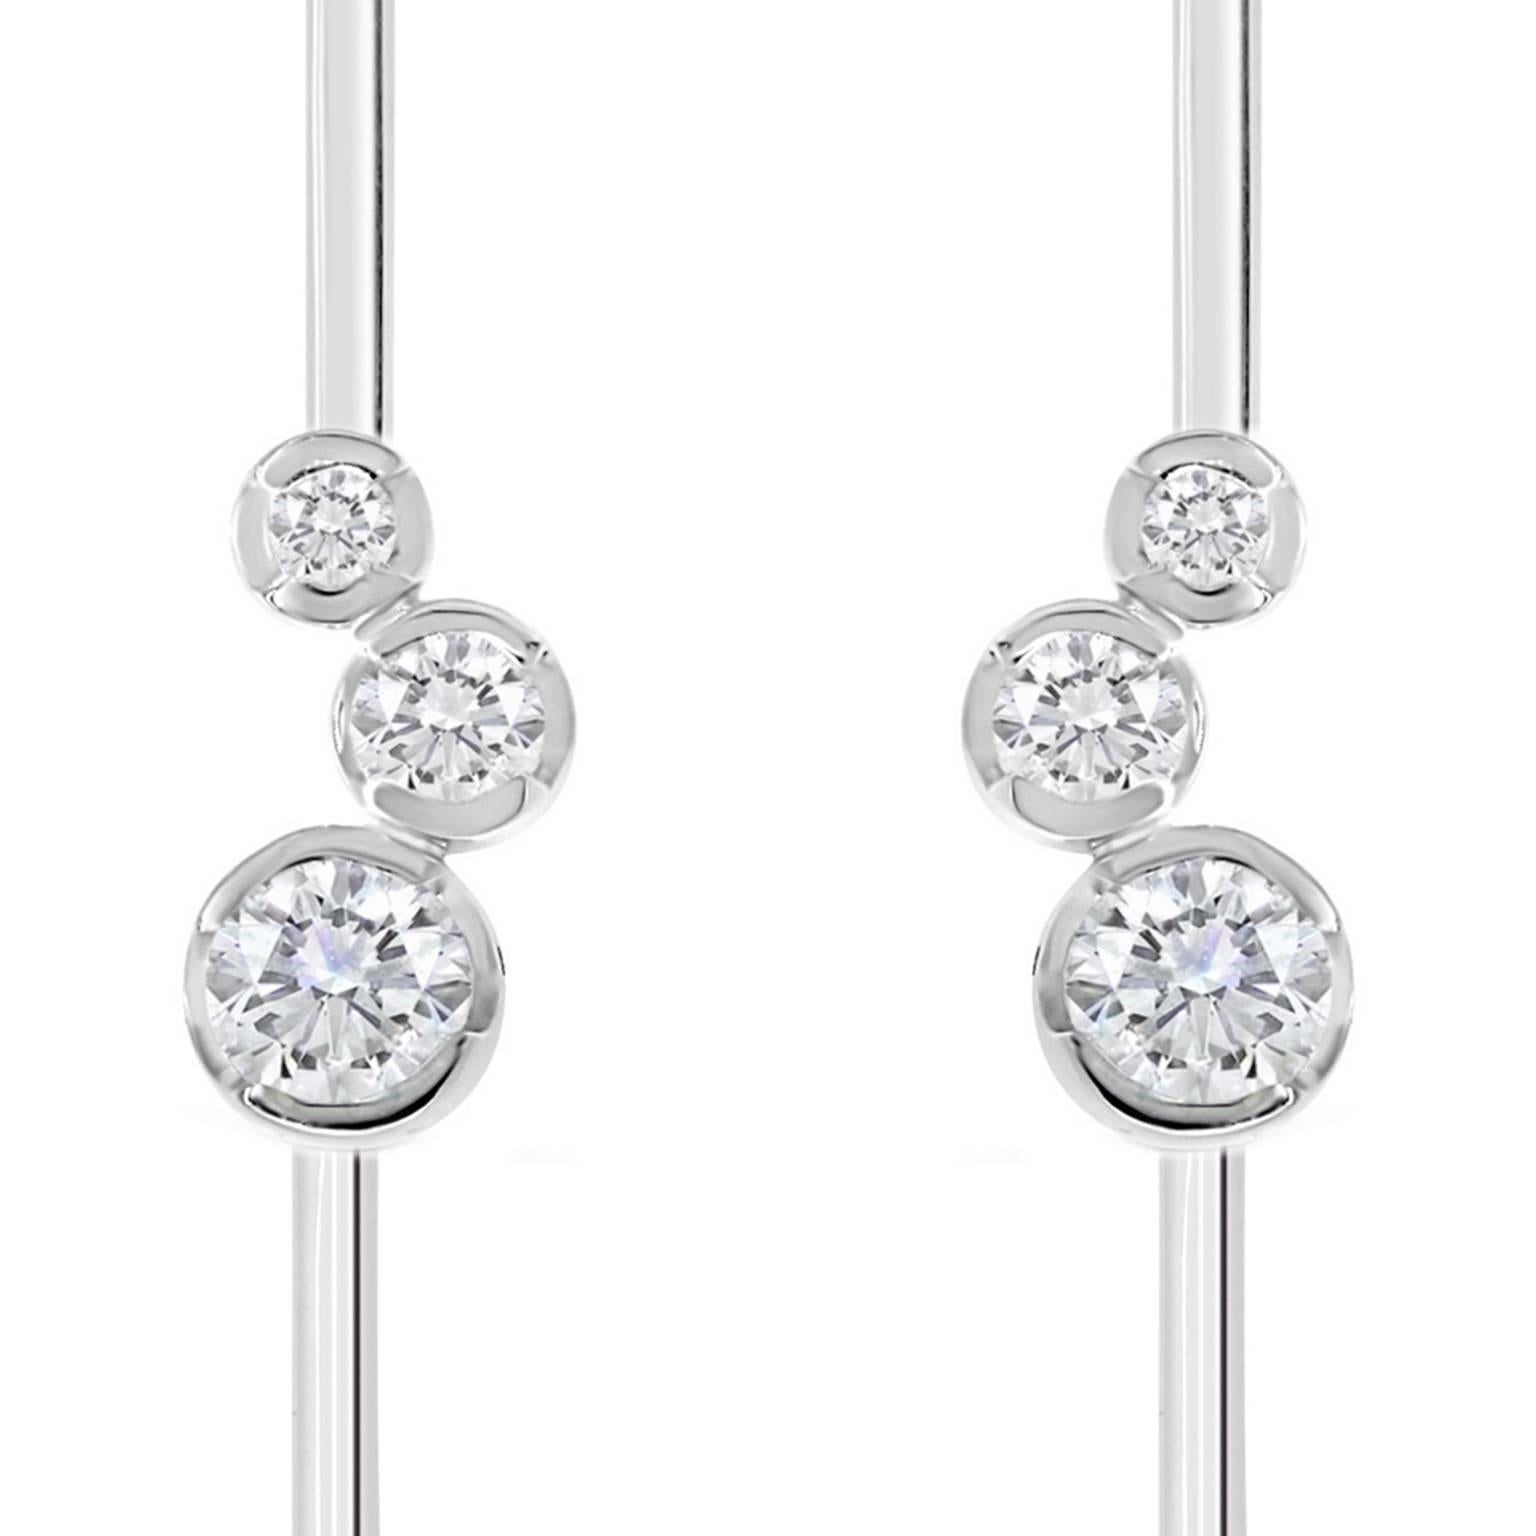 These elegant New York inspired diamond earrings are handcrafted in our Sydney studio, in 18 karat white gold. The clean, contemporary design coupled with top quality diamonds, gives these elegant earrings a sense of understated luxury. 

These